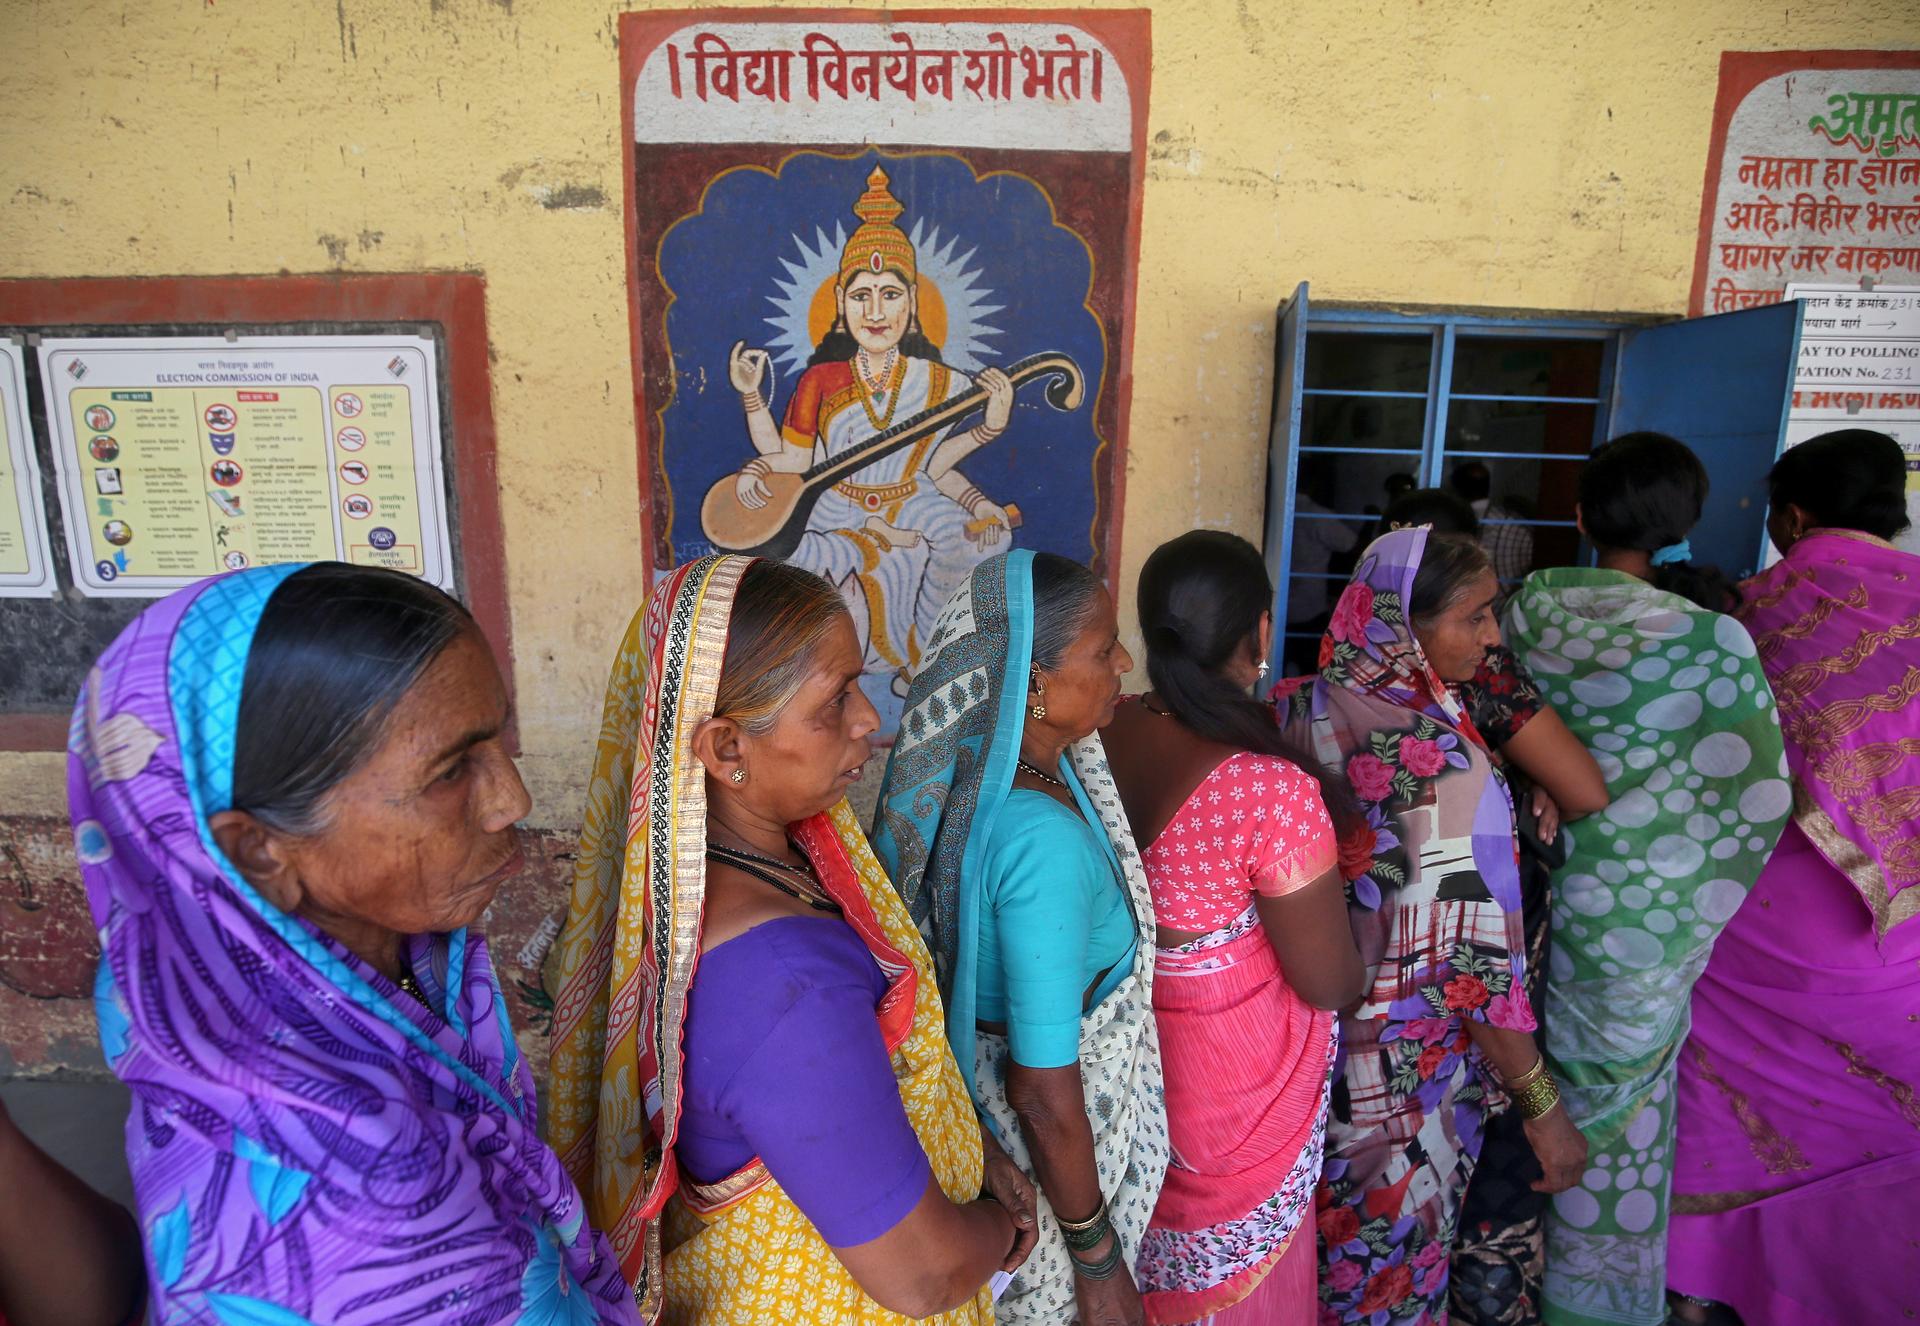 Women in colorful saris line up to vote